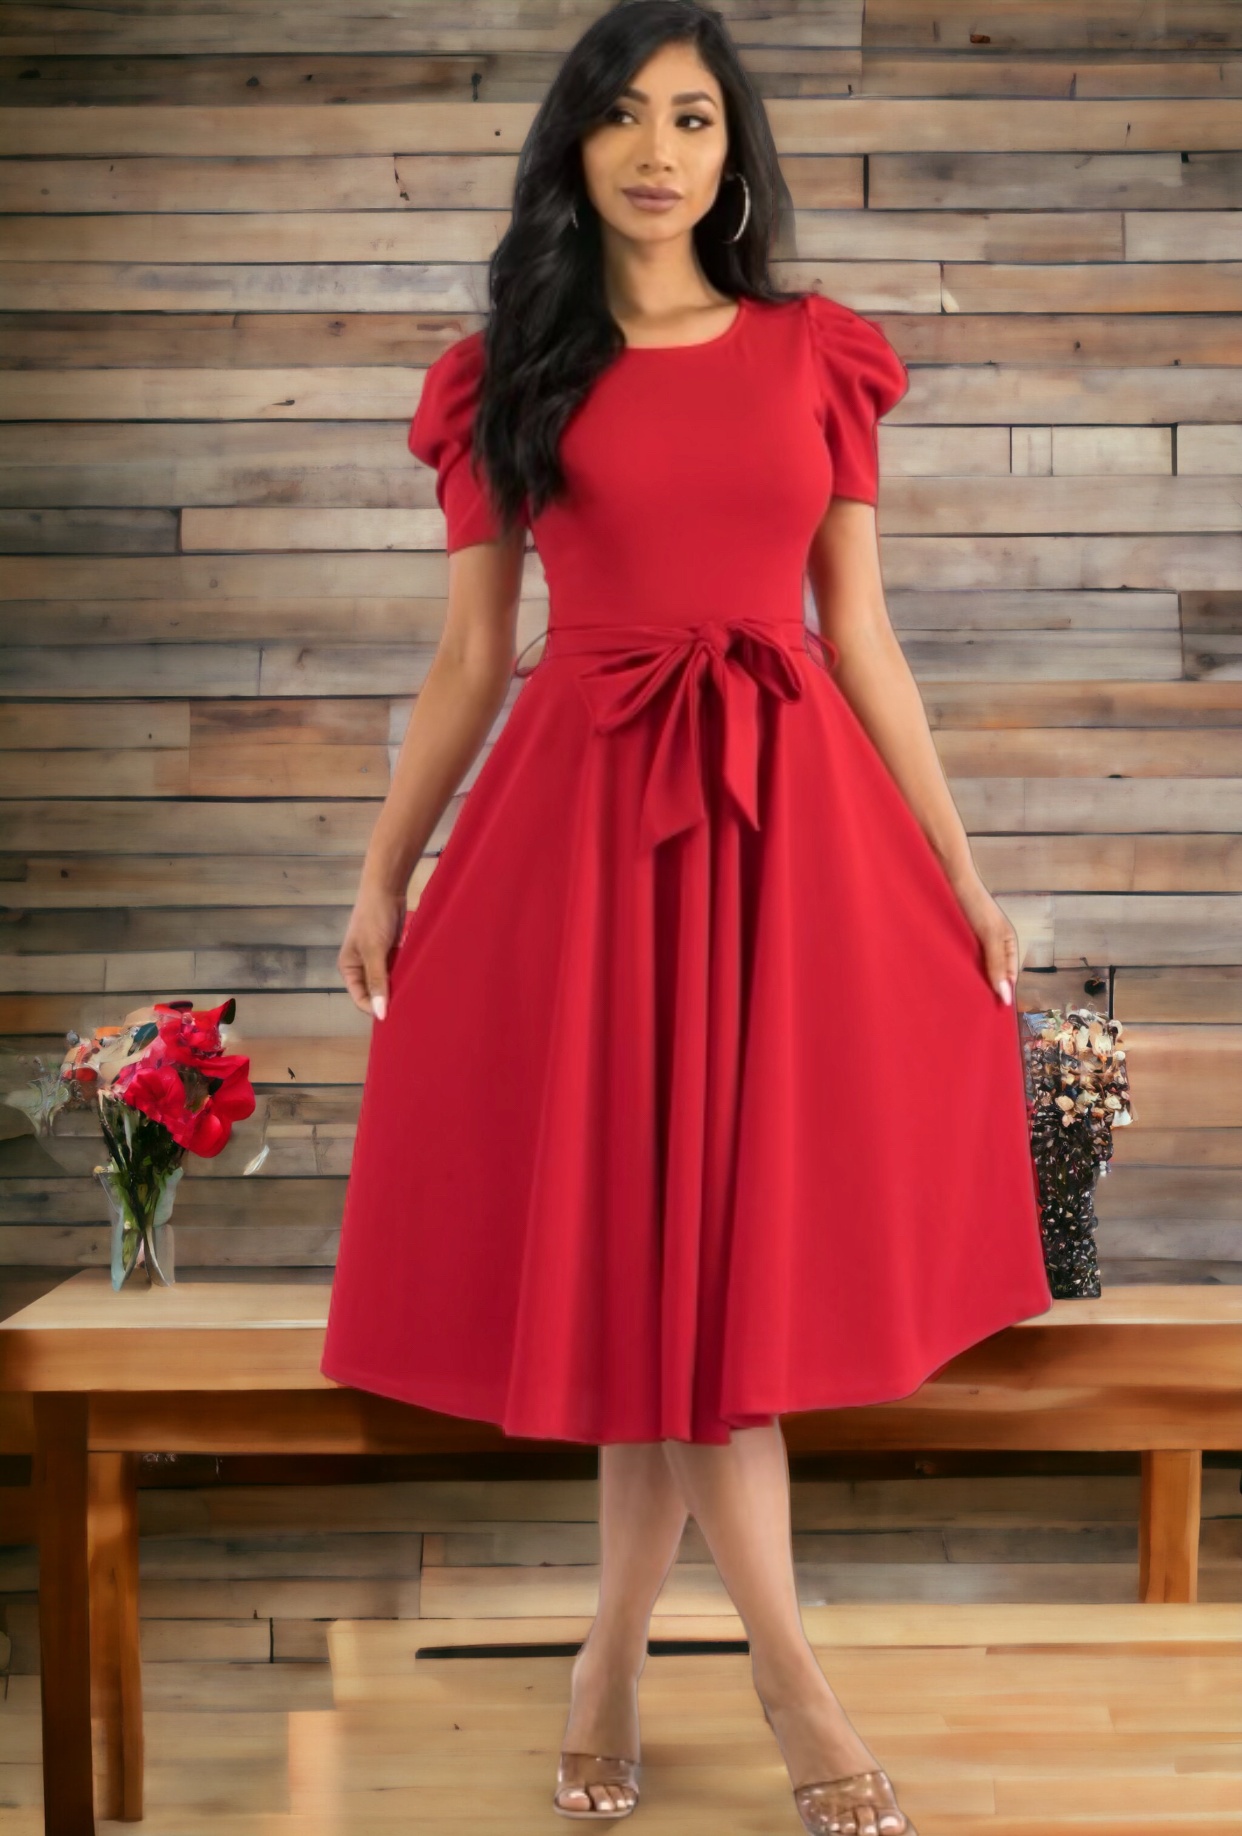 Puff Sleeve Cocktail Dress, Sizes 1X - 3X (Red)